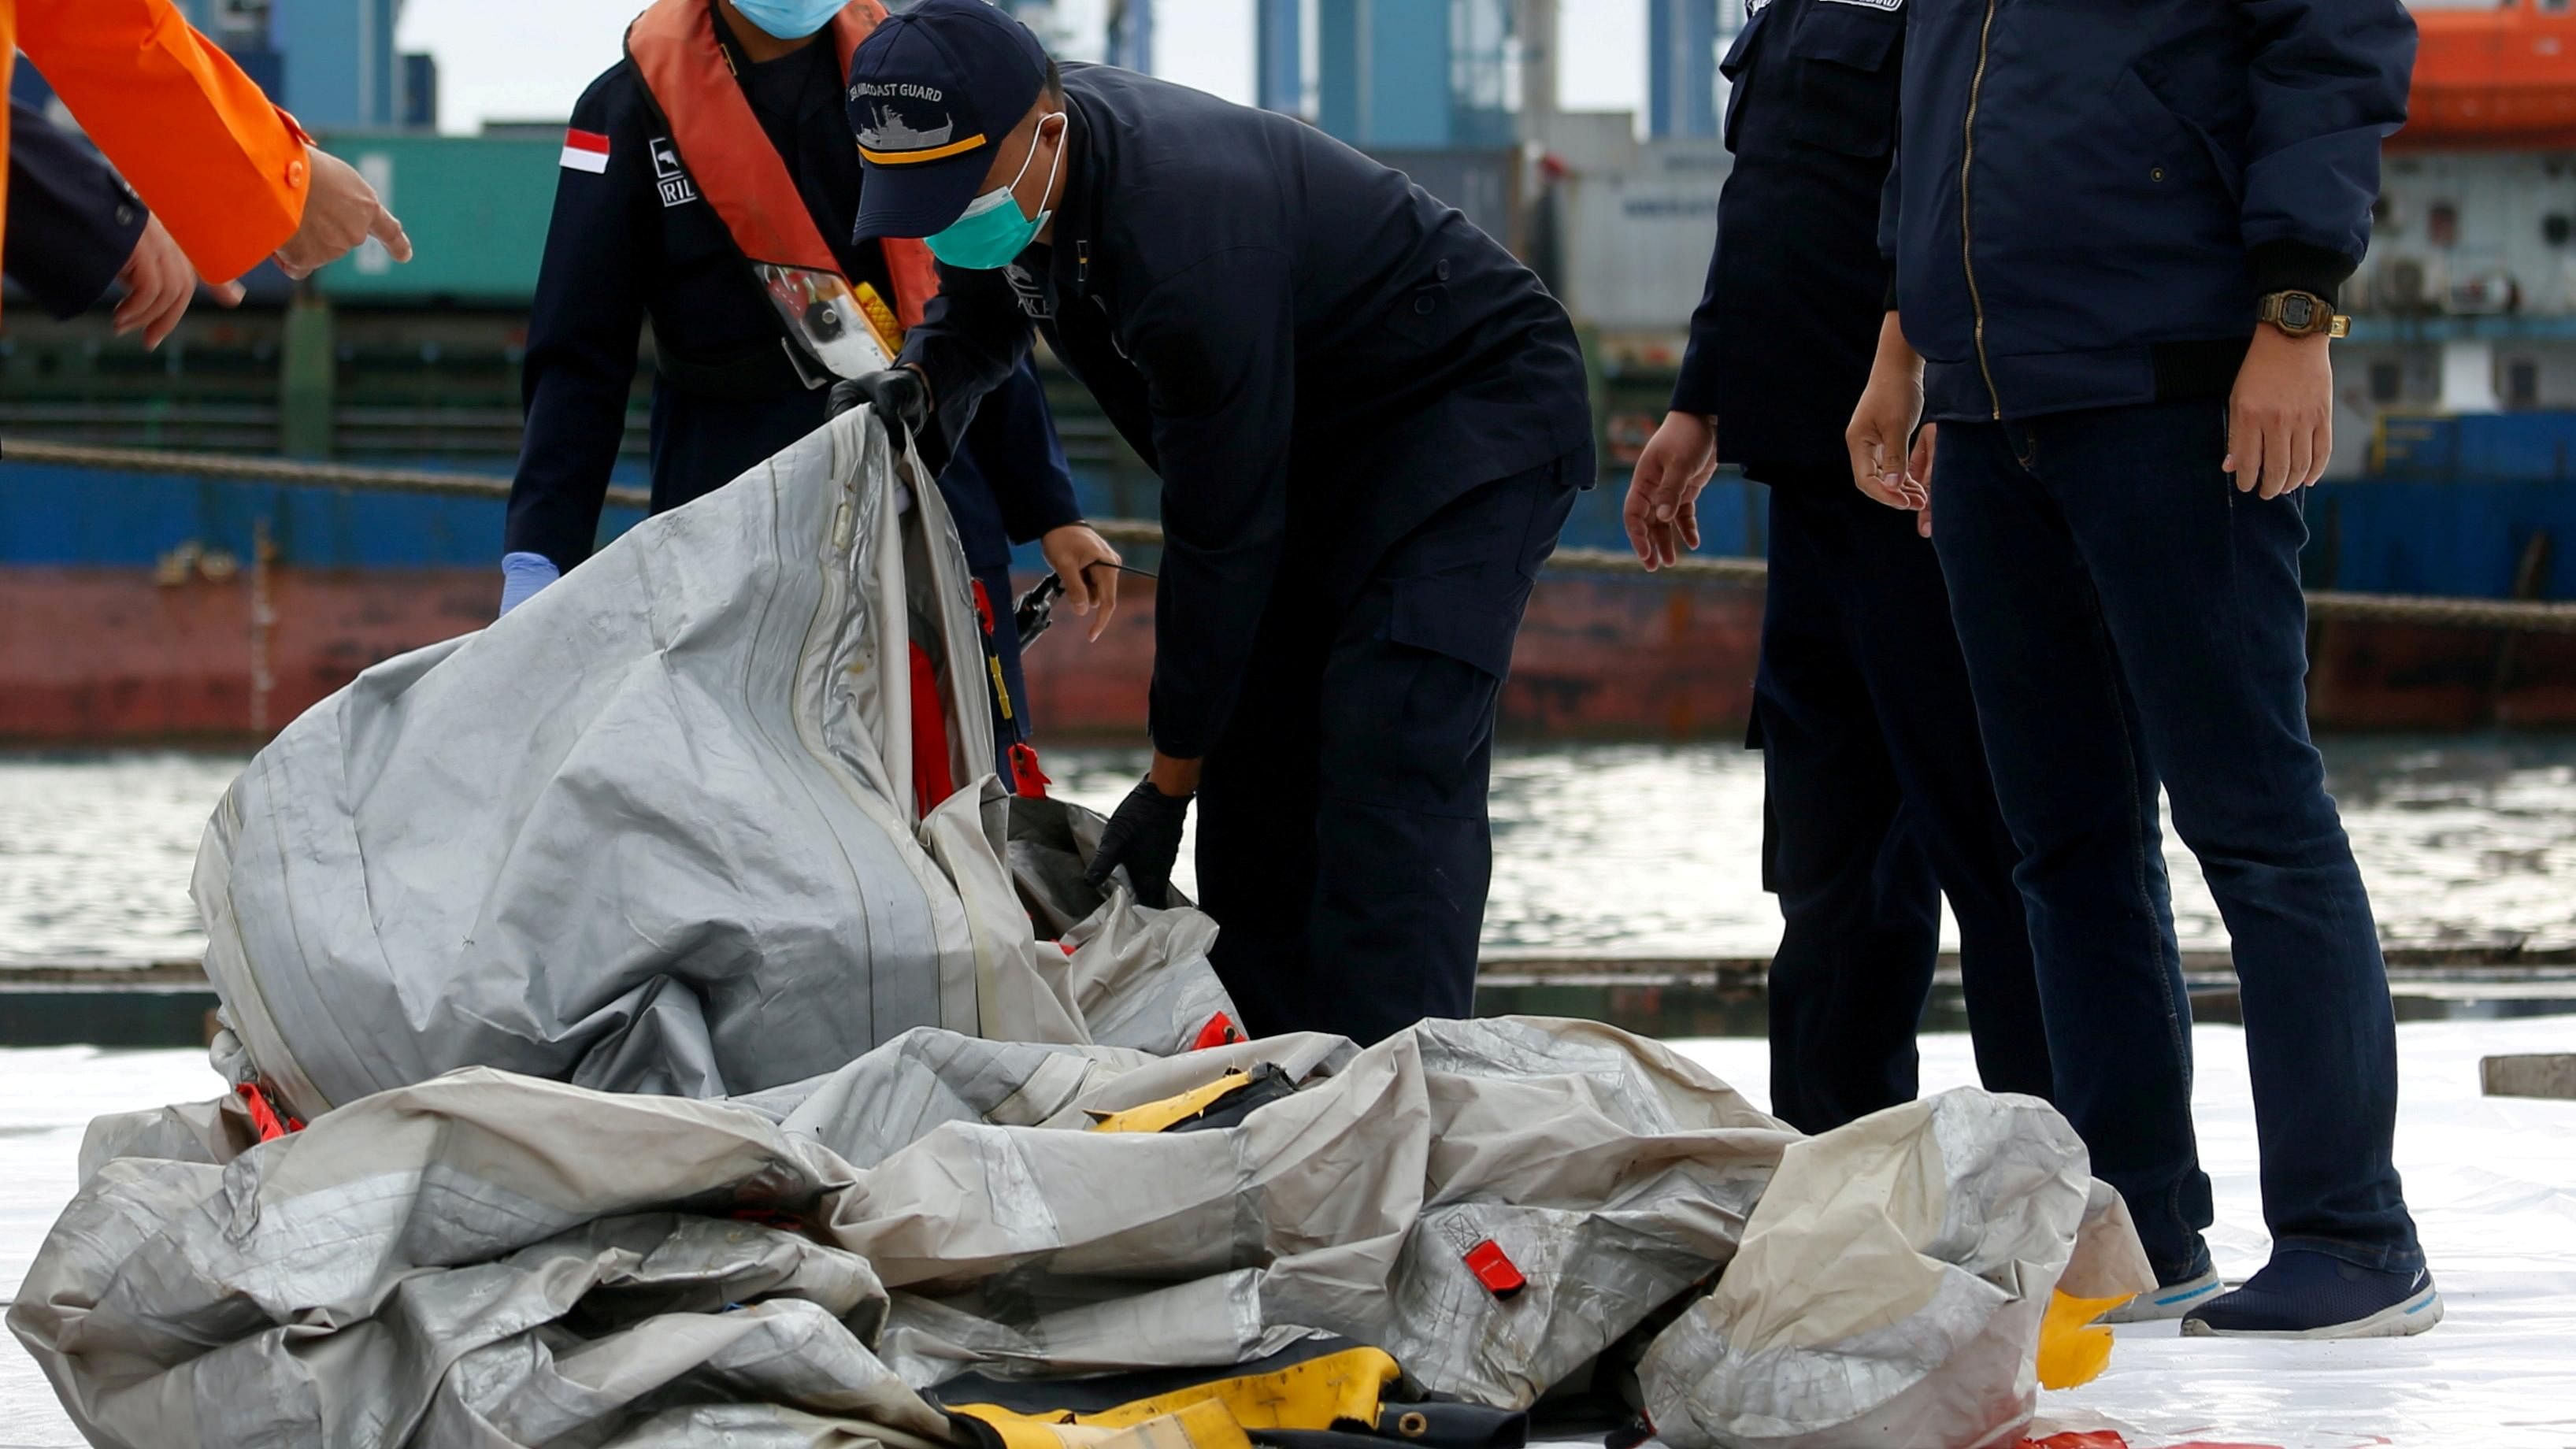 Indonesian rescue members carry what is believed to be the remains of the Sriwijaya Air plane flight SJ182 which crashed into the sea, at Jakarta International Container Terminal port in Jakarta, Indonesia. Credit: Reuters